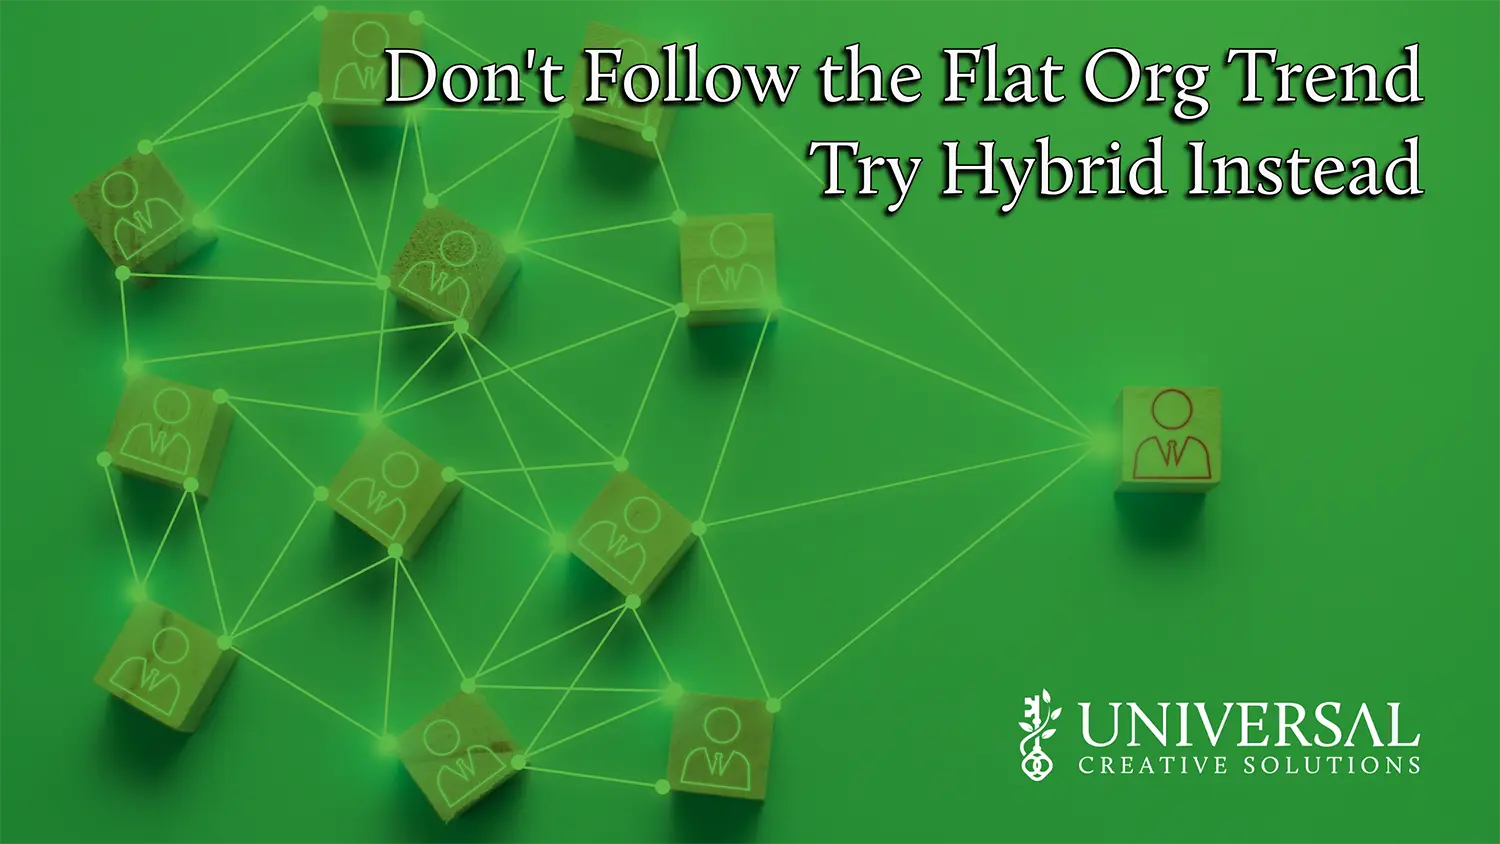 Don't Follow the Flat Organization Trend - Try Hybrid Instead